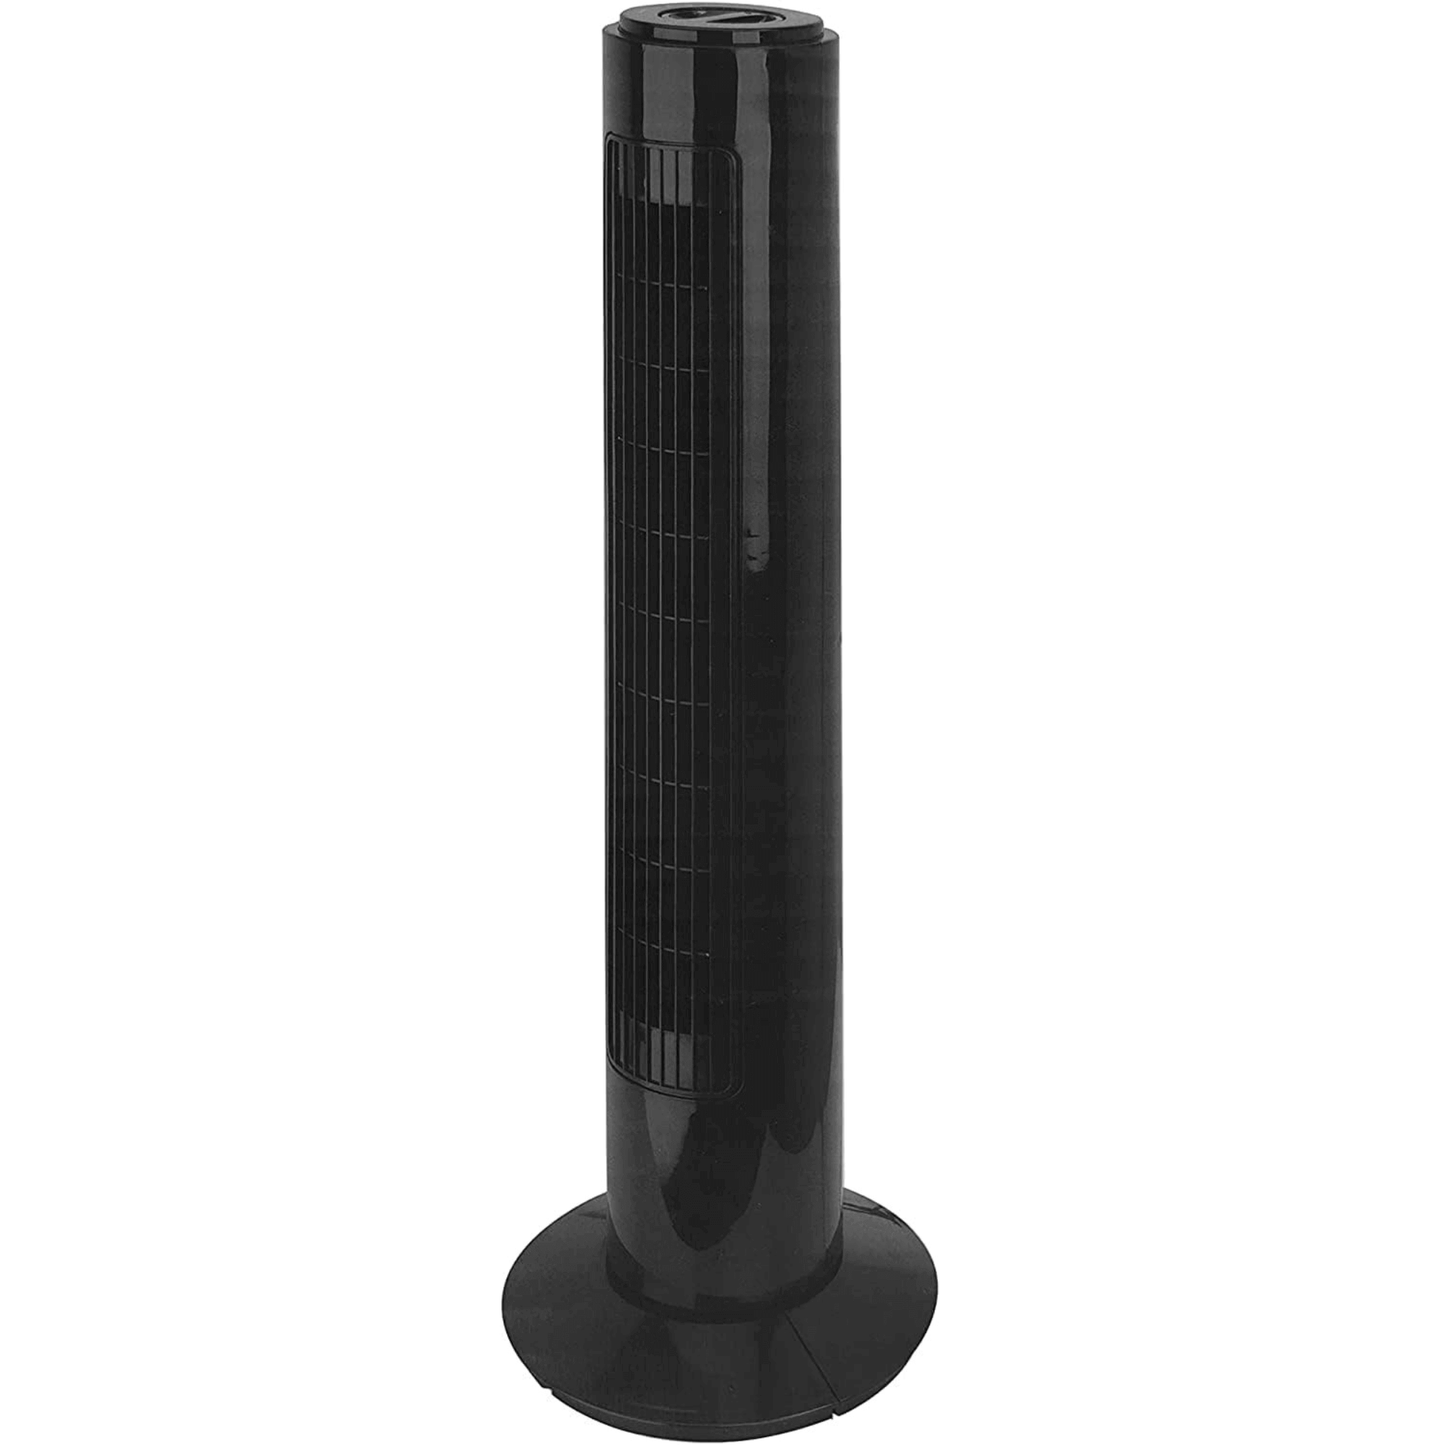 ENYAA 29 INCH TOWER FAN TS2911A - PERFECT HOME COOLING SOLUTION BLACK